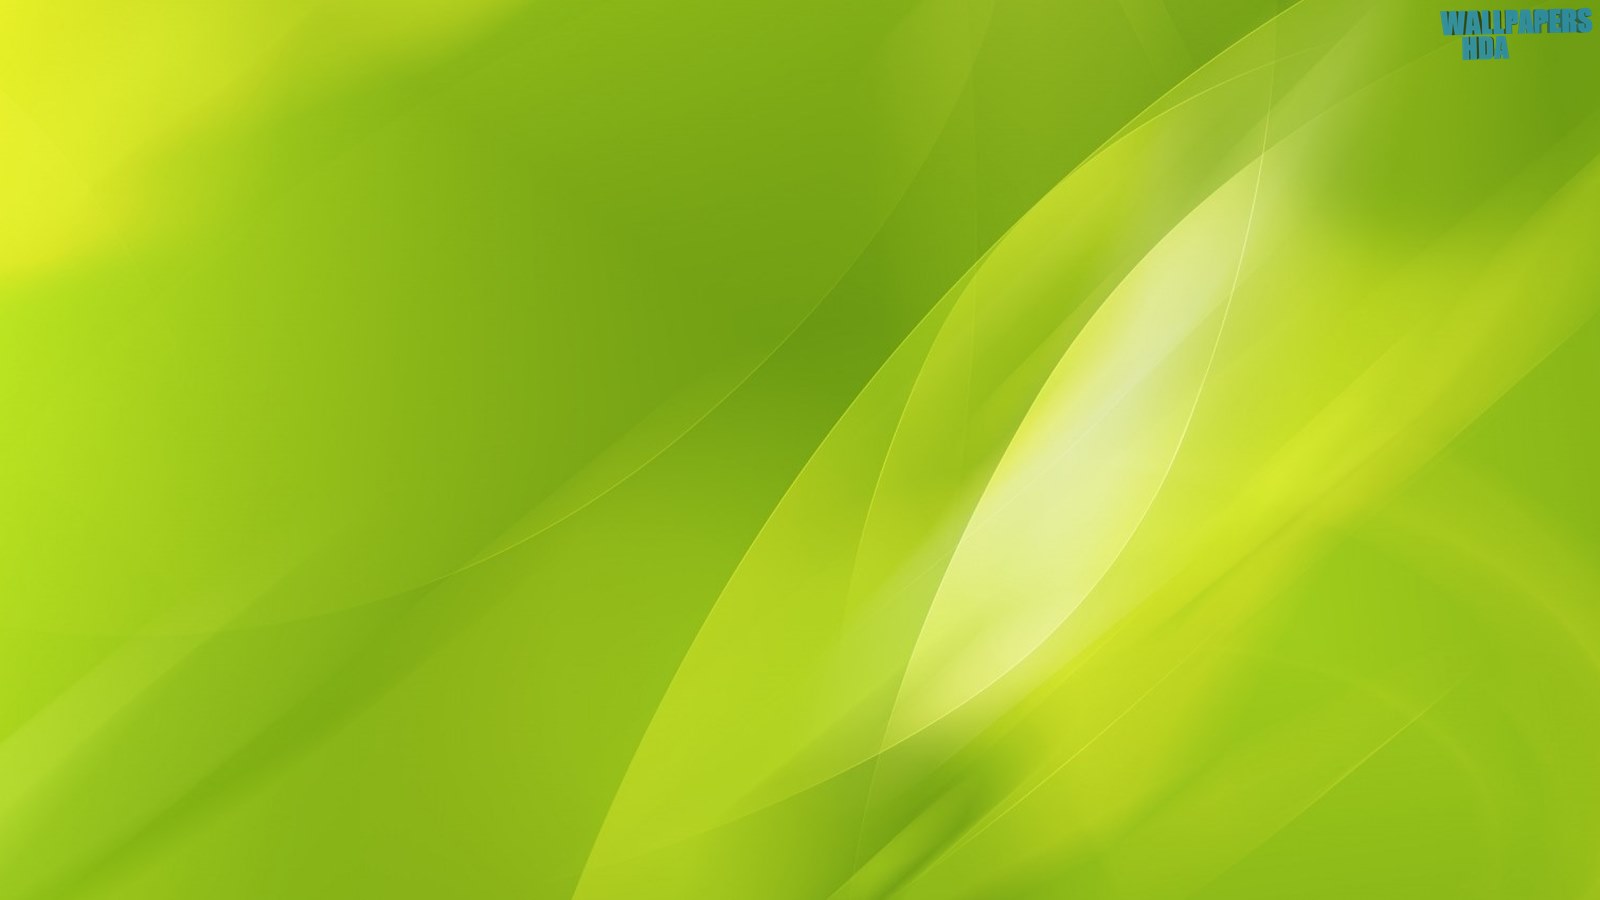 Abstract graphic design lime green wallpaper 1600x900